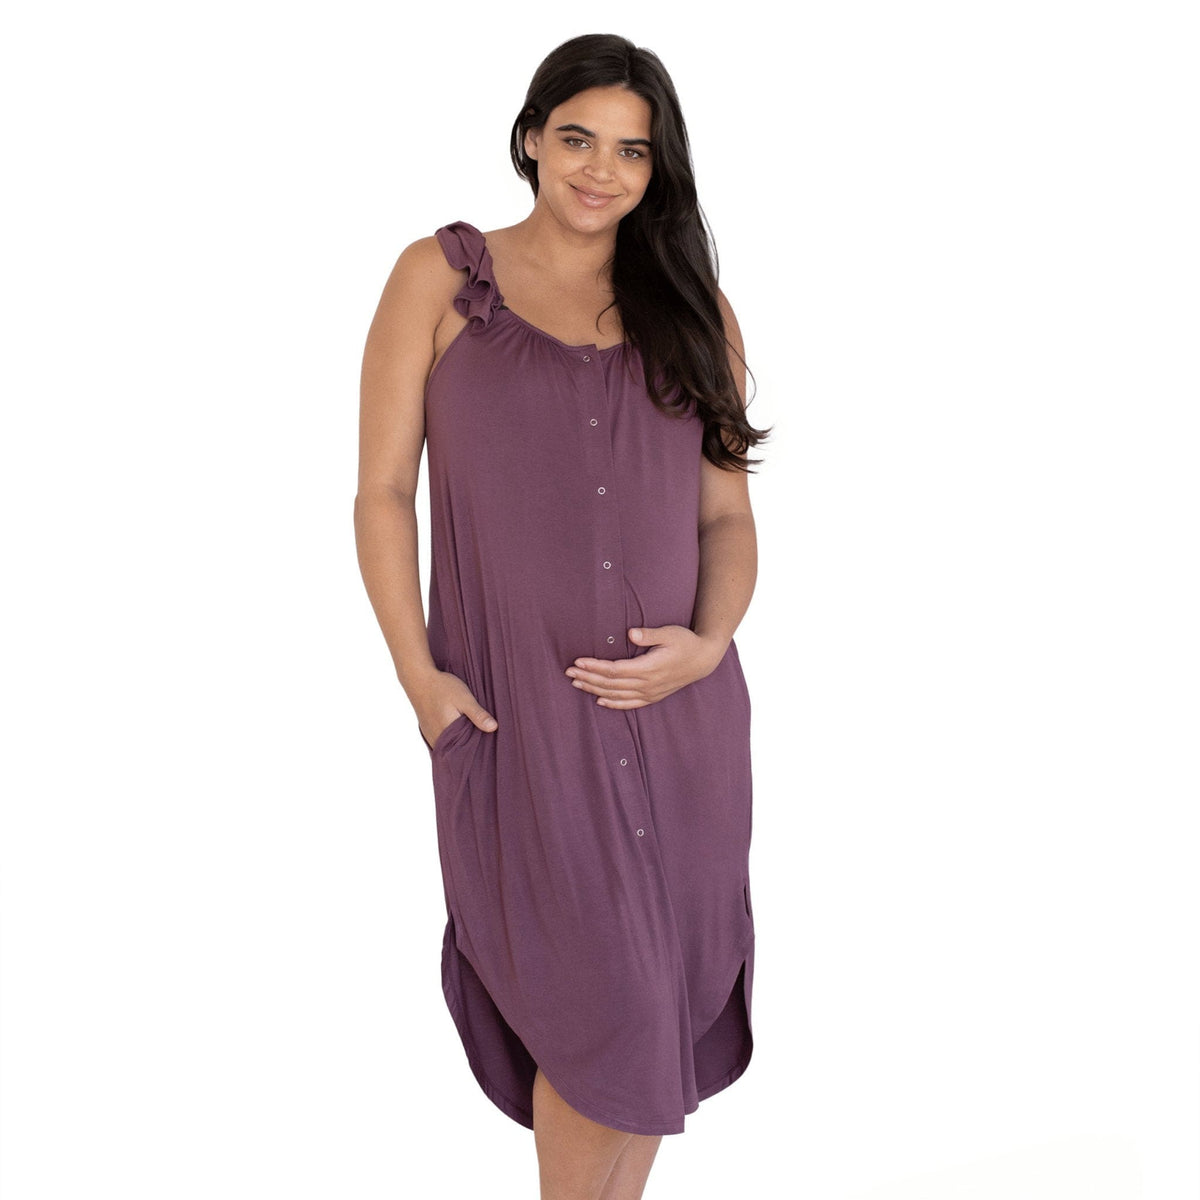 Kindred Bravely Universal Labor And Delivery Gown 3 In 1 Labor, Delivery,  Nursing Gown For Hospital